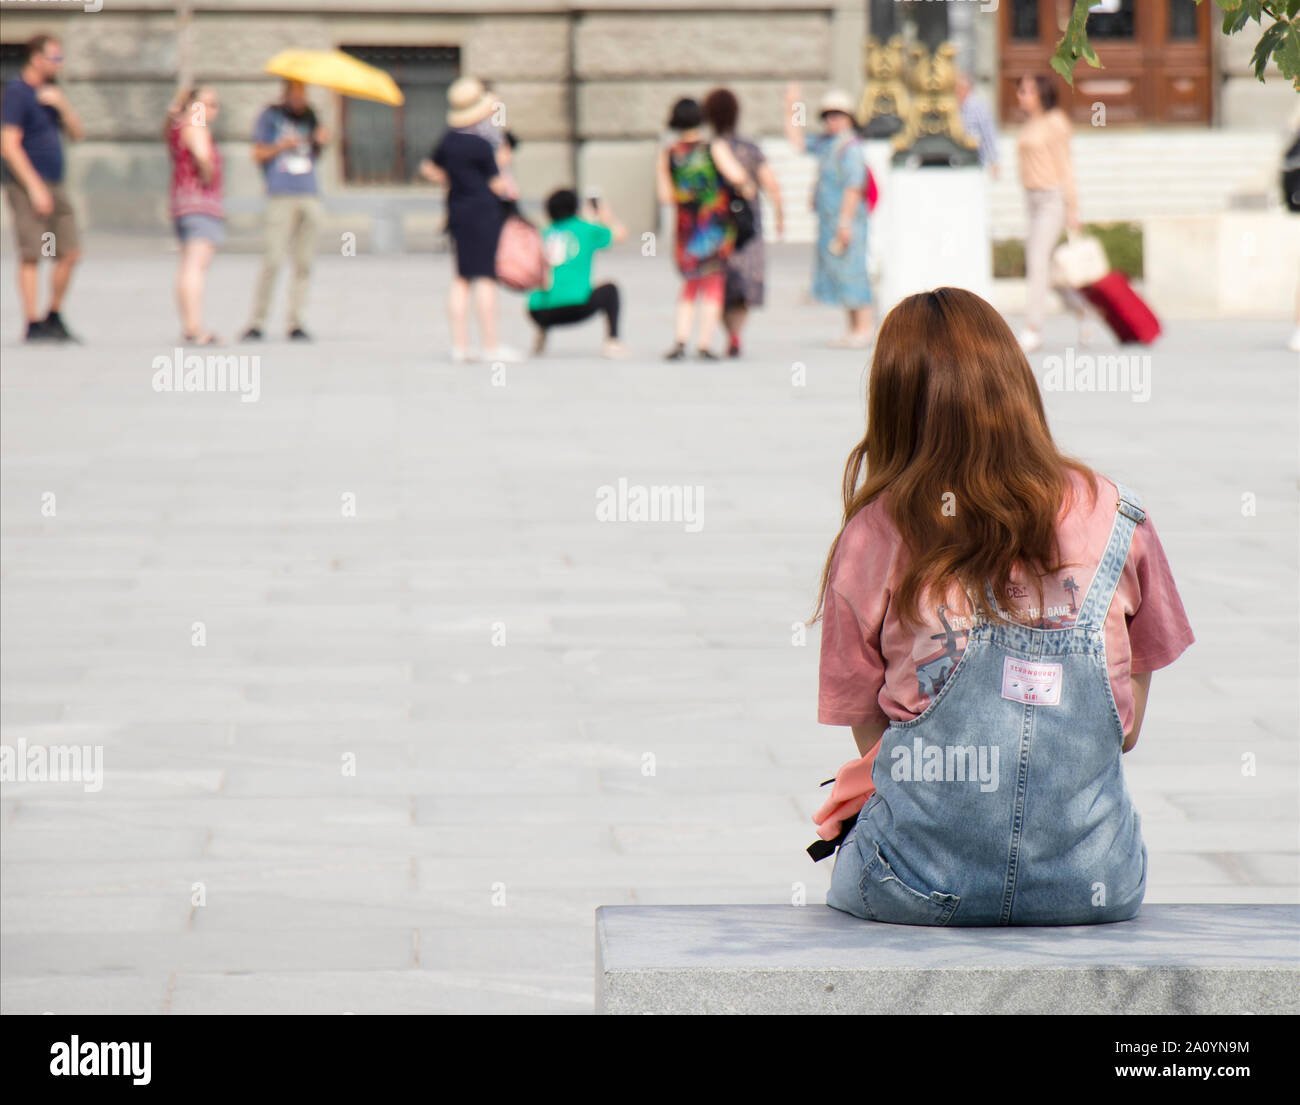 Belgrade, Serbia - September 12, 2019 : One young teenage girl with ginger hair in jeans overall sitting and waiting on city bench on town square, and Stock Photo